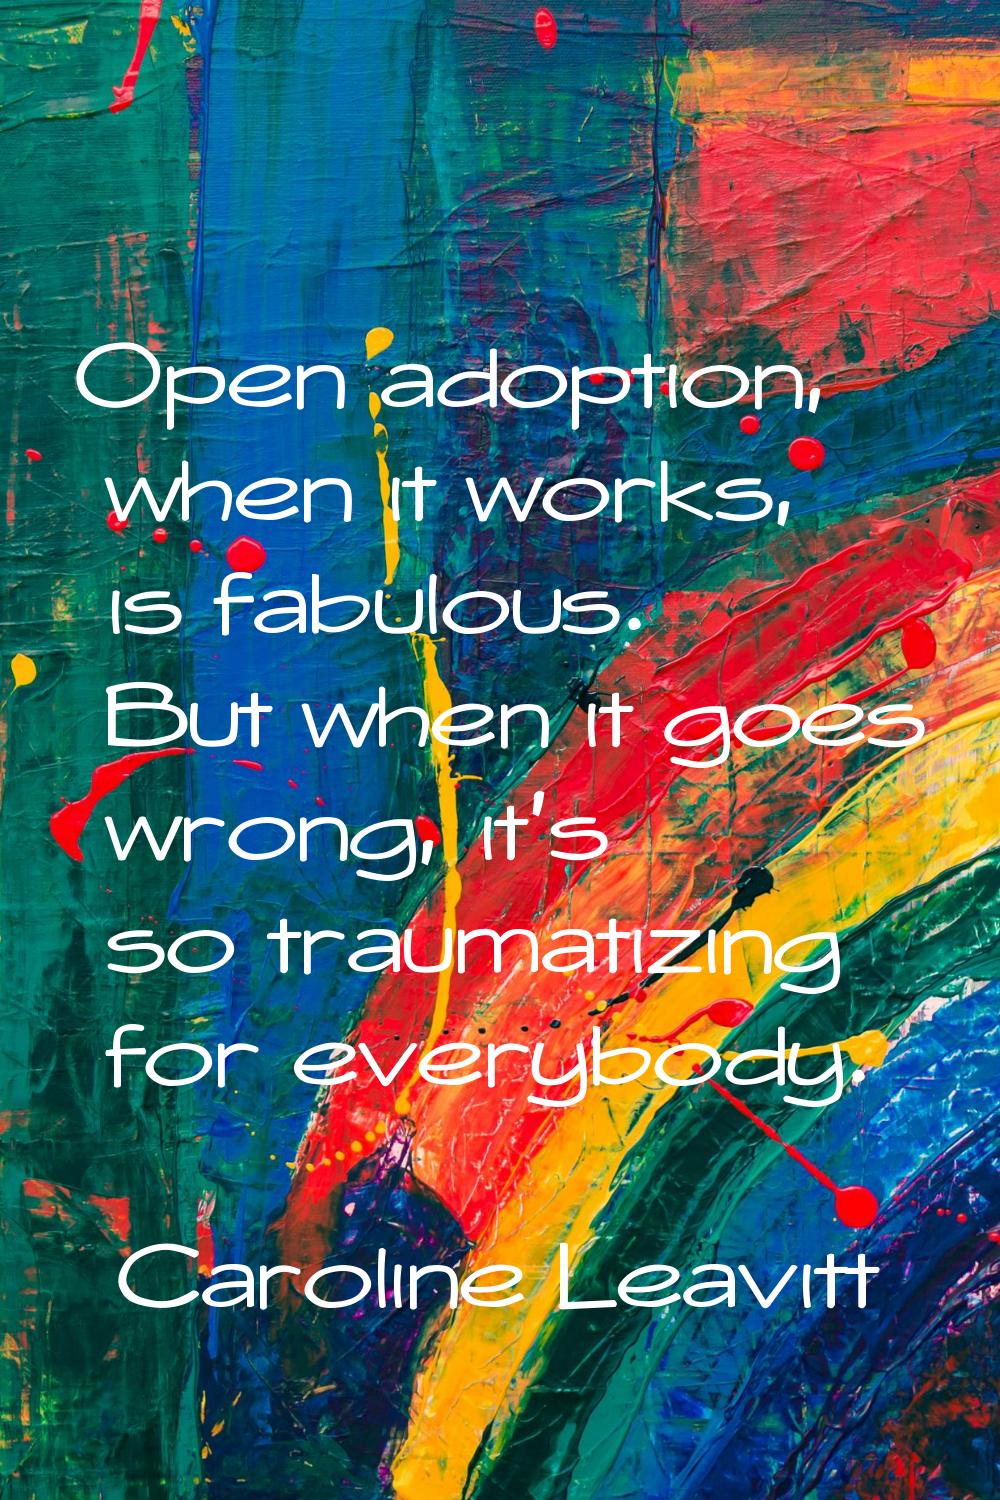 Open adoption, when it works, is fabulous. But when it goes wrong, it's so traumatizing for everybo